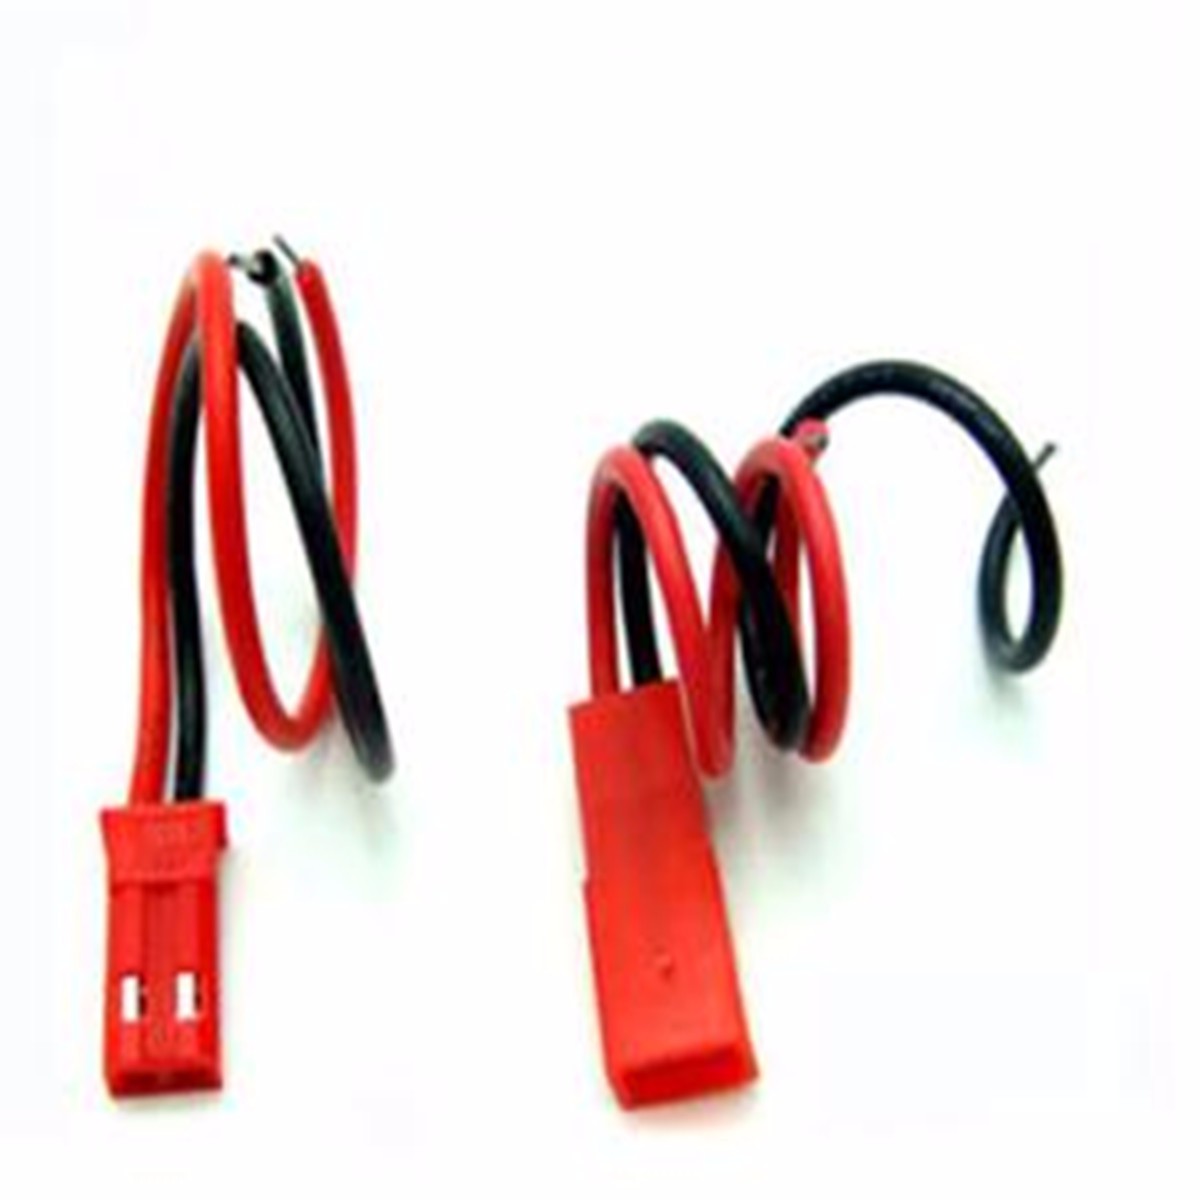 Excellwayreg-10-Pairs-2-Pins-JST-Male--Female-Connectors-Plug-Cable-Wire-Line-110mm-Red-1268119-3